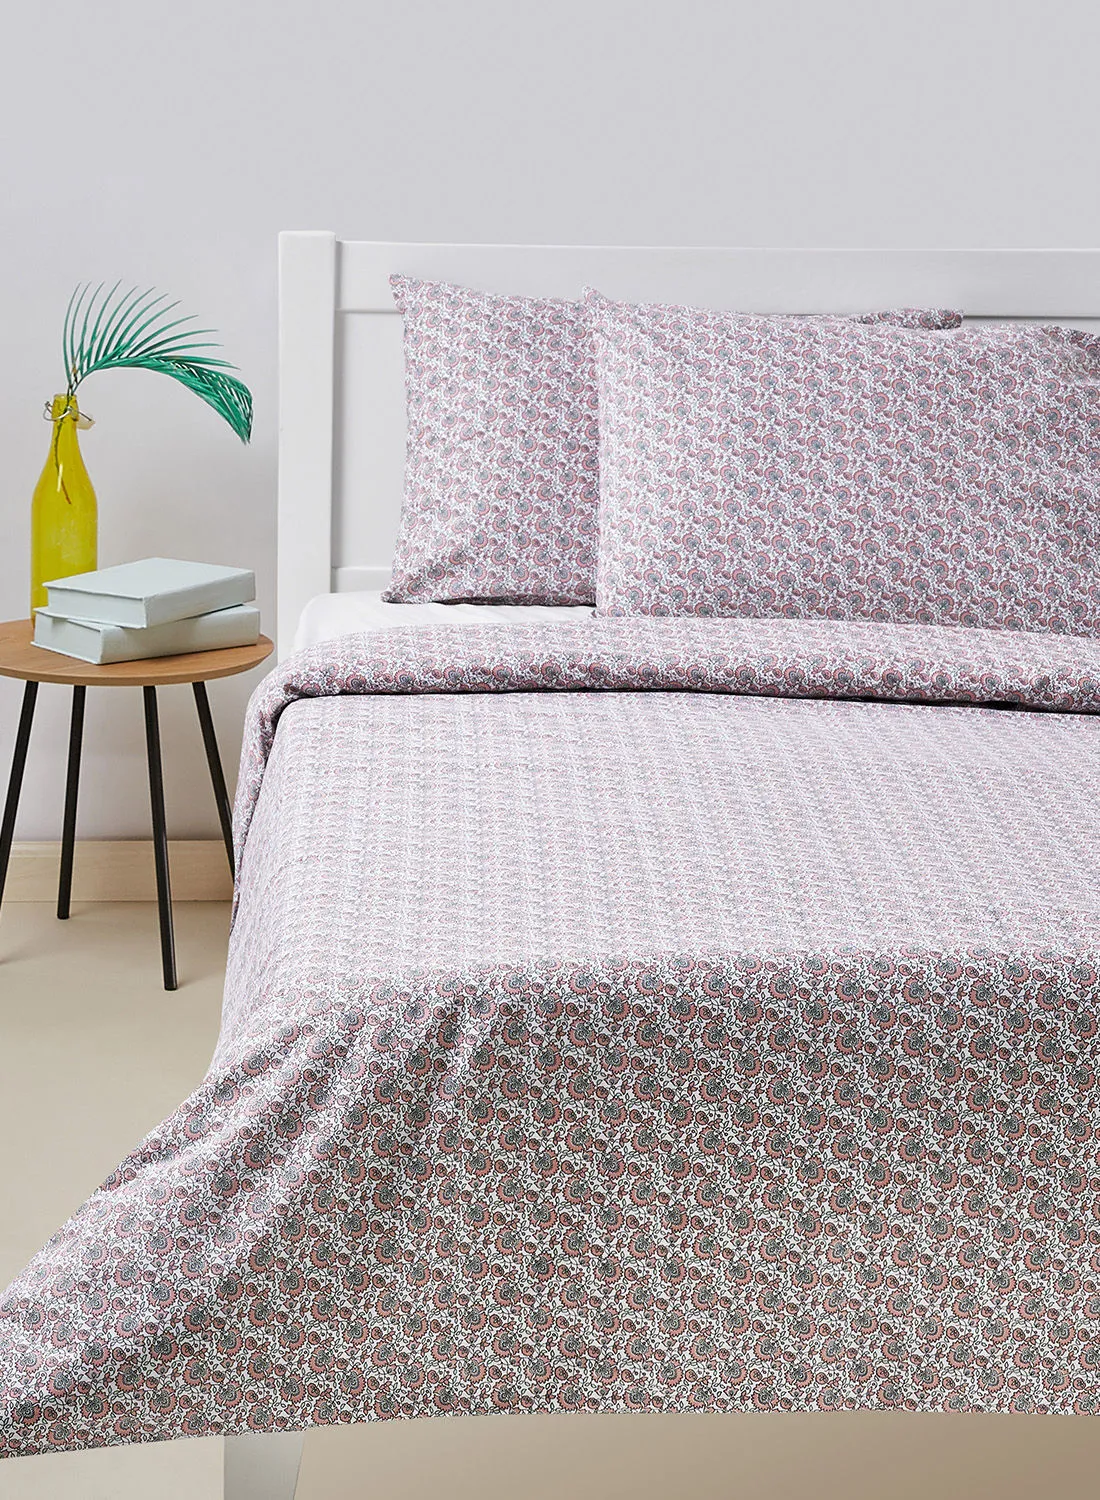 Amal Duvet Cover Set With Pillow Cover 50X75 Cm, Comforter 160X200 Cm - 100% Cotton Adhira Percale Rotary Print - 144 Thread Count Cotton Purple/Red Twin